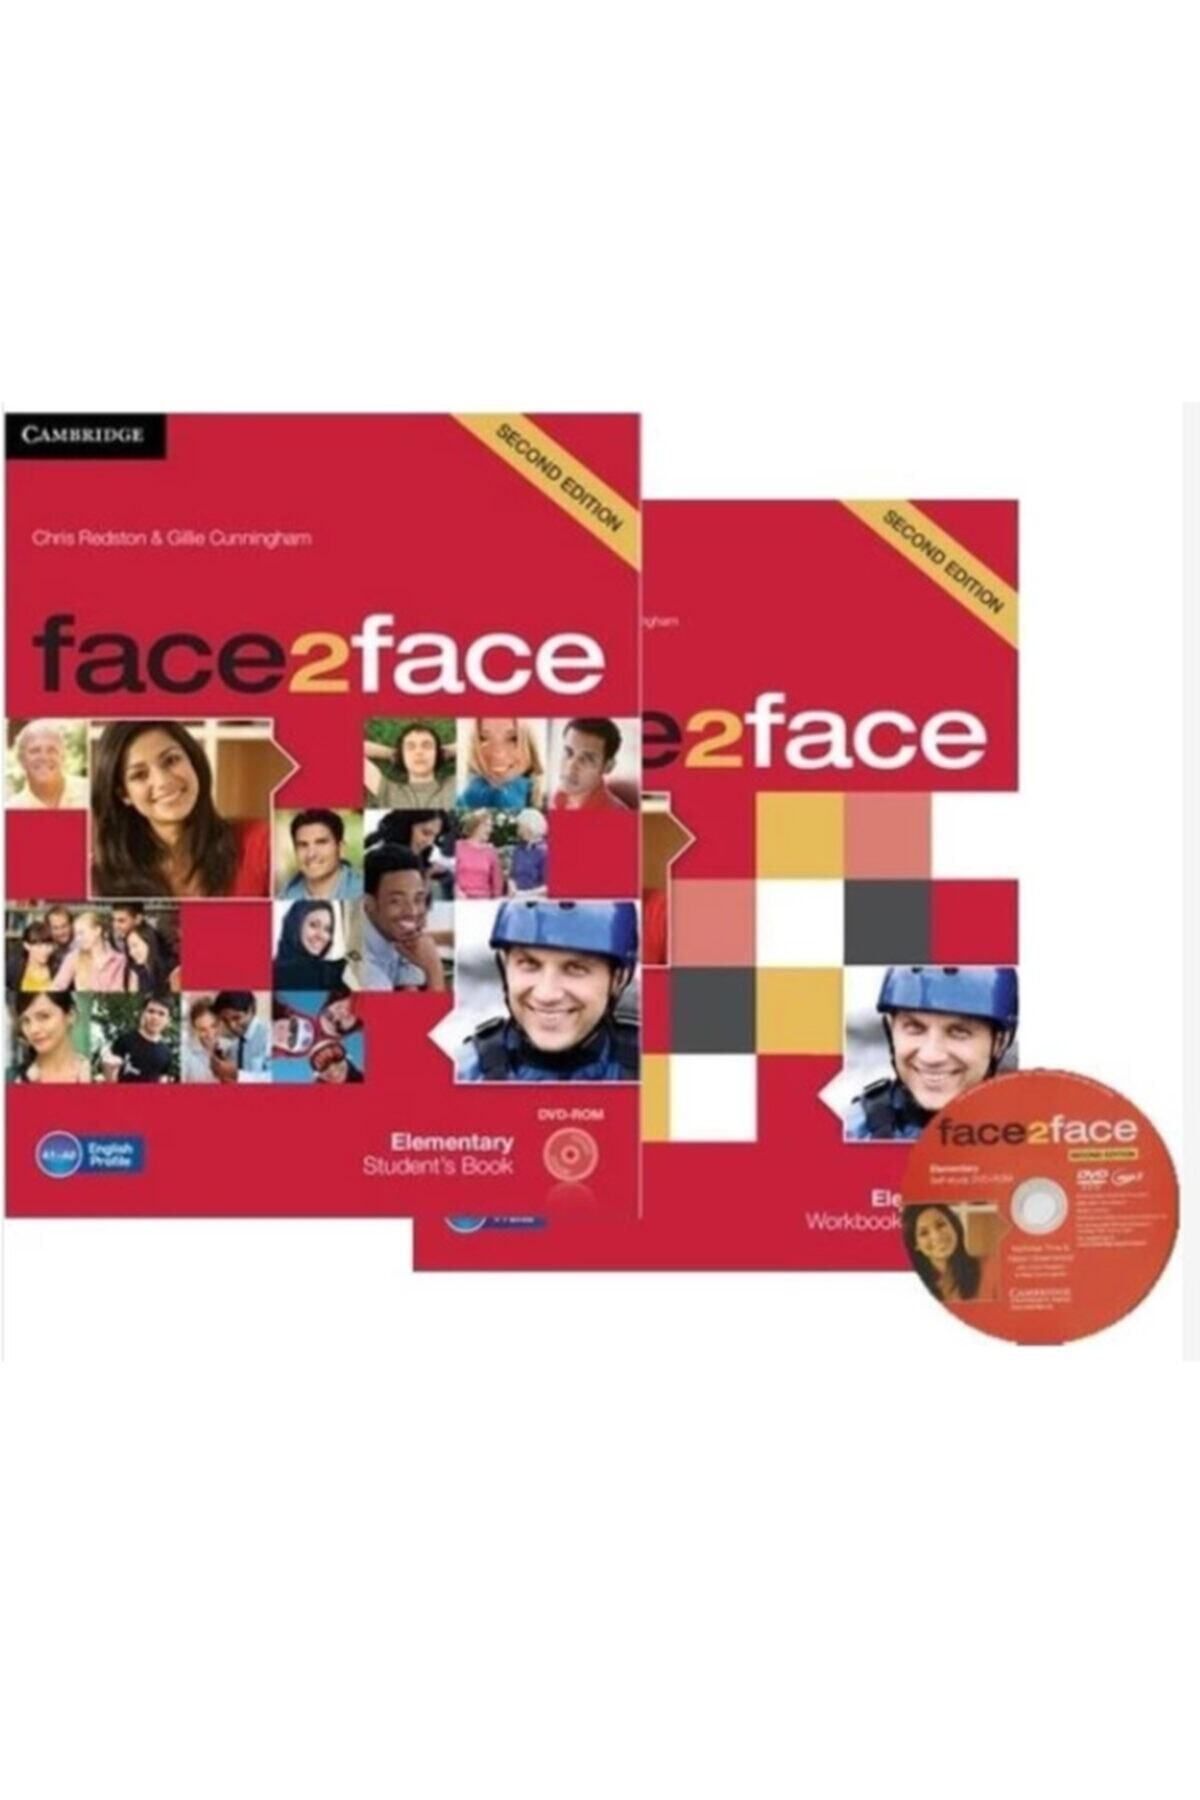 Face2face Elementary student's book. Face to face Elementary. Учебник Оксфорд Education Soul face Elementary Workbook аудирование 1.02. Suits 2 Elementary Full book. Face2face elementary